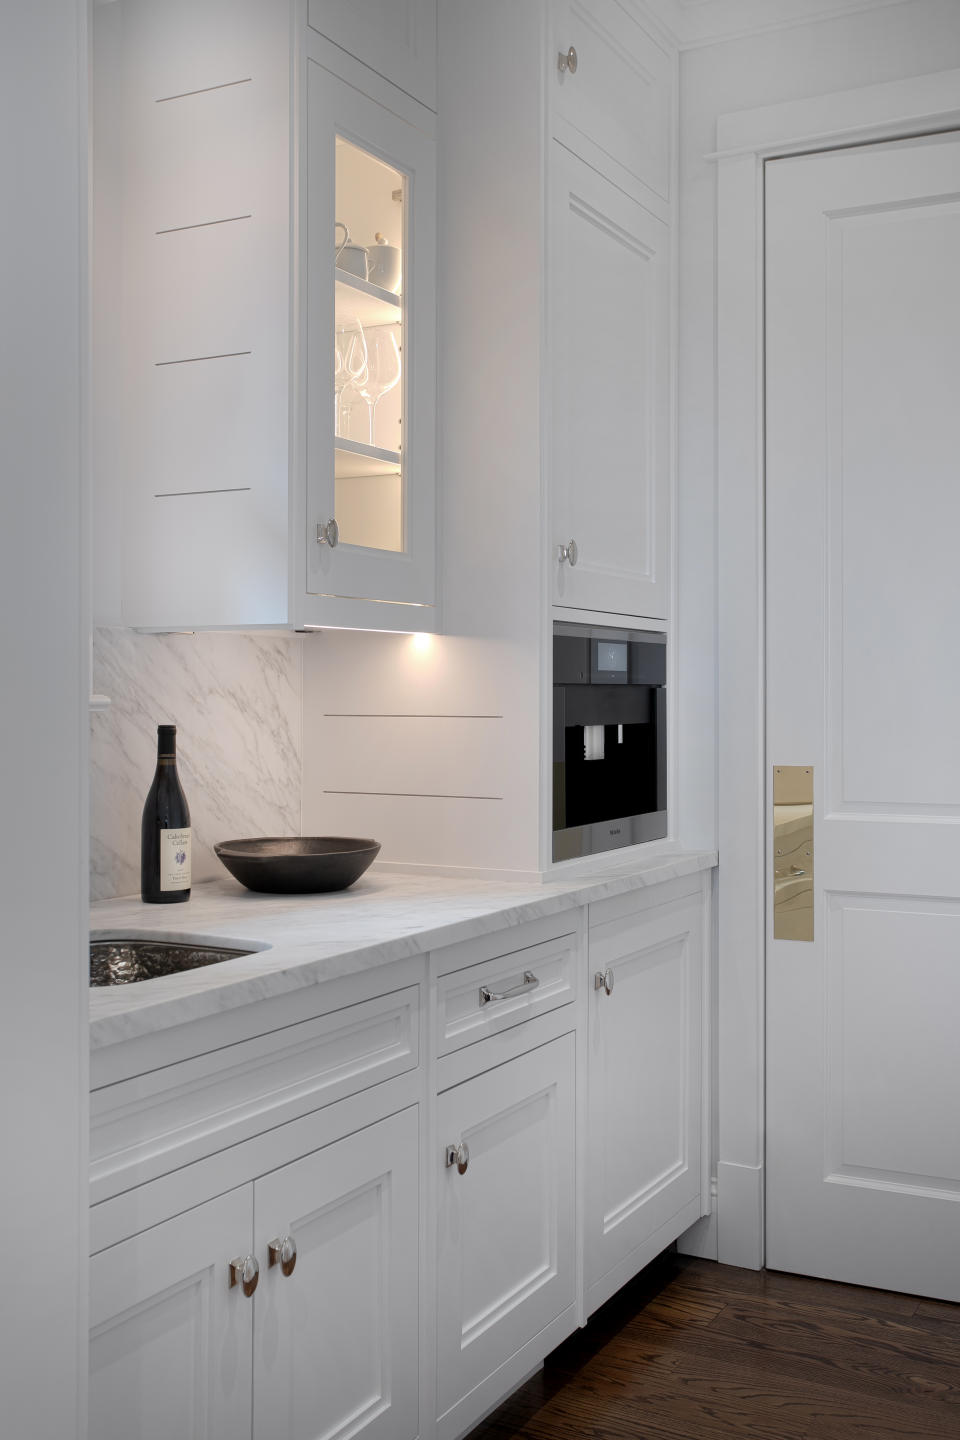 A white kitchen with marble countertops and inset kitchen cabinetry